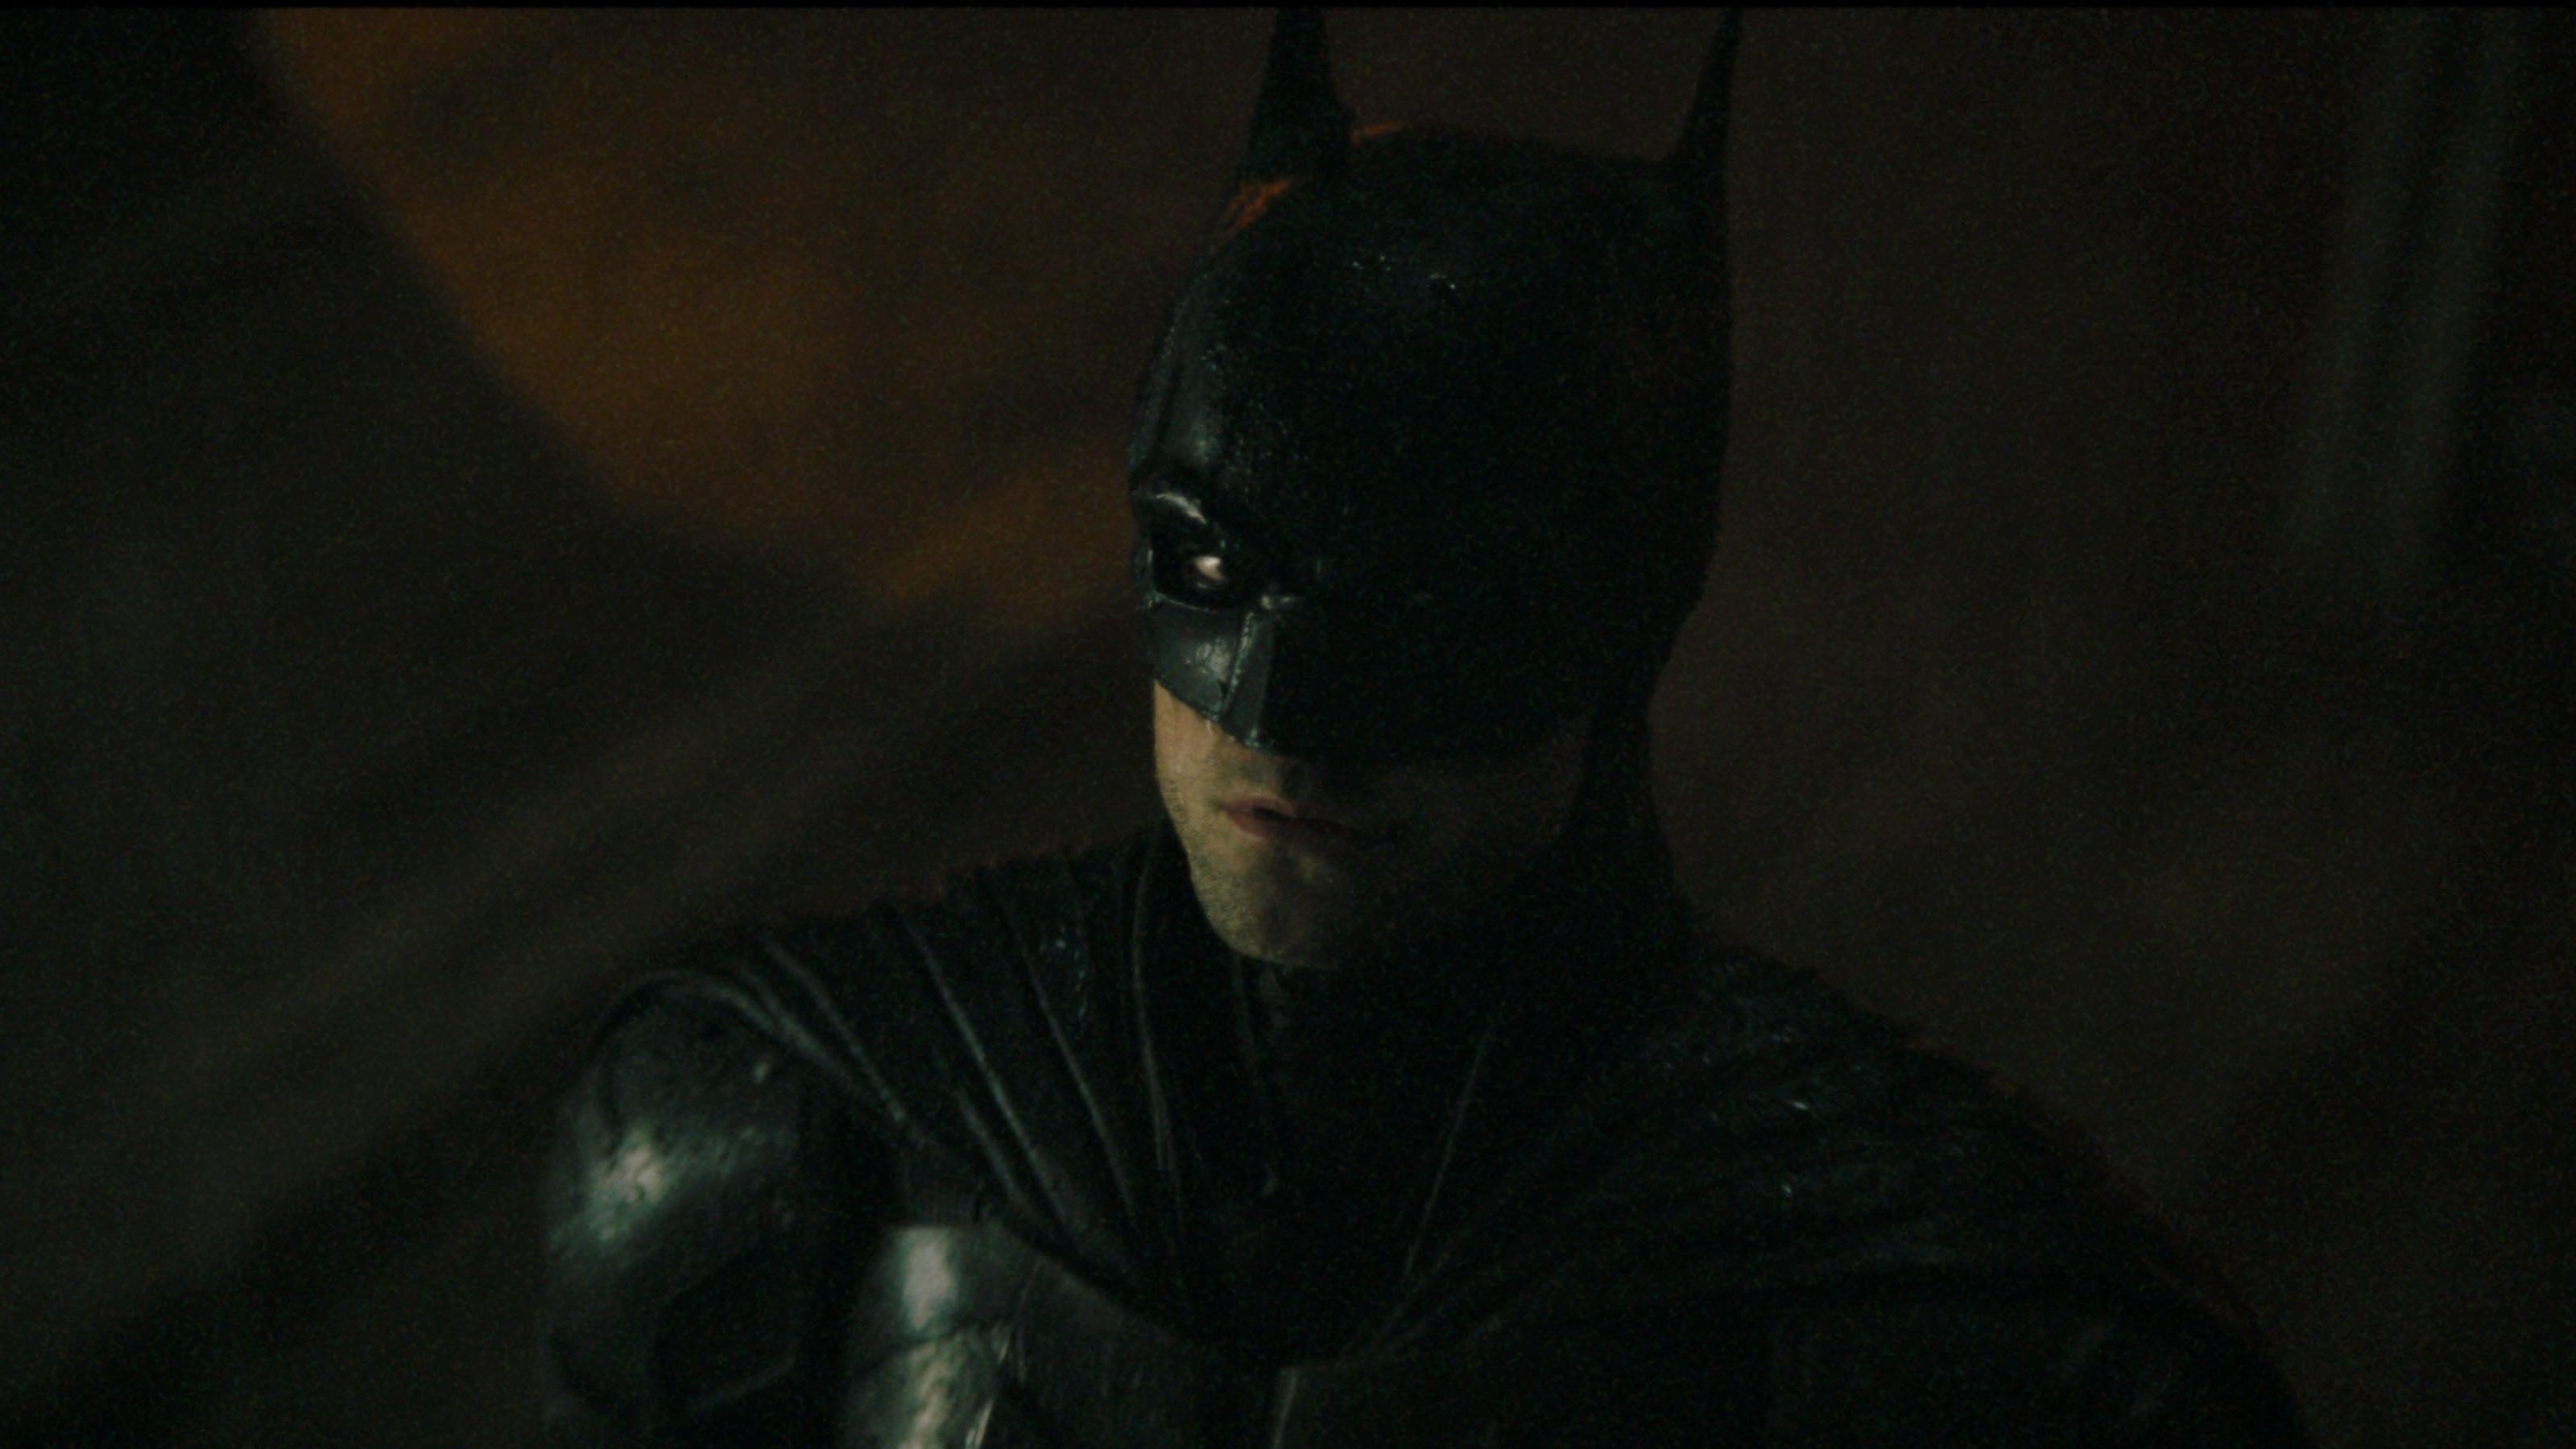 Robert Pattinson’s Batman Voice is finally here in the new trailer for The Batman